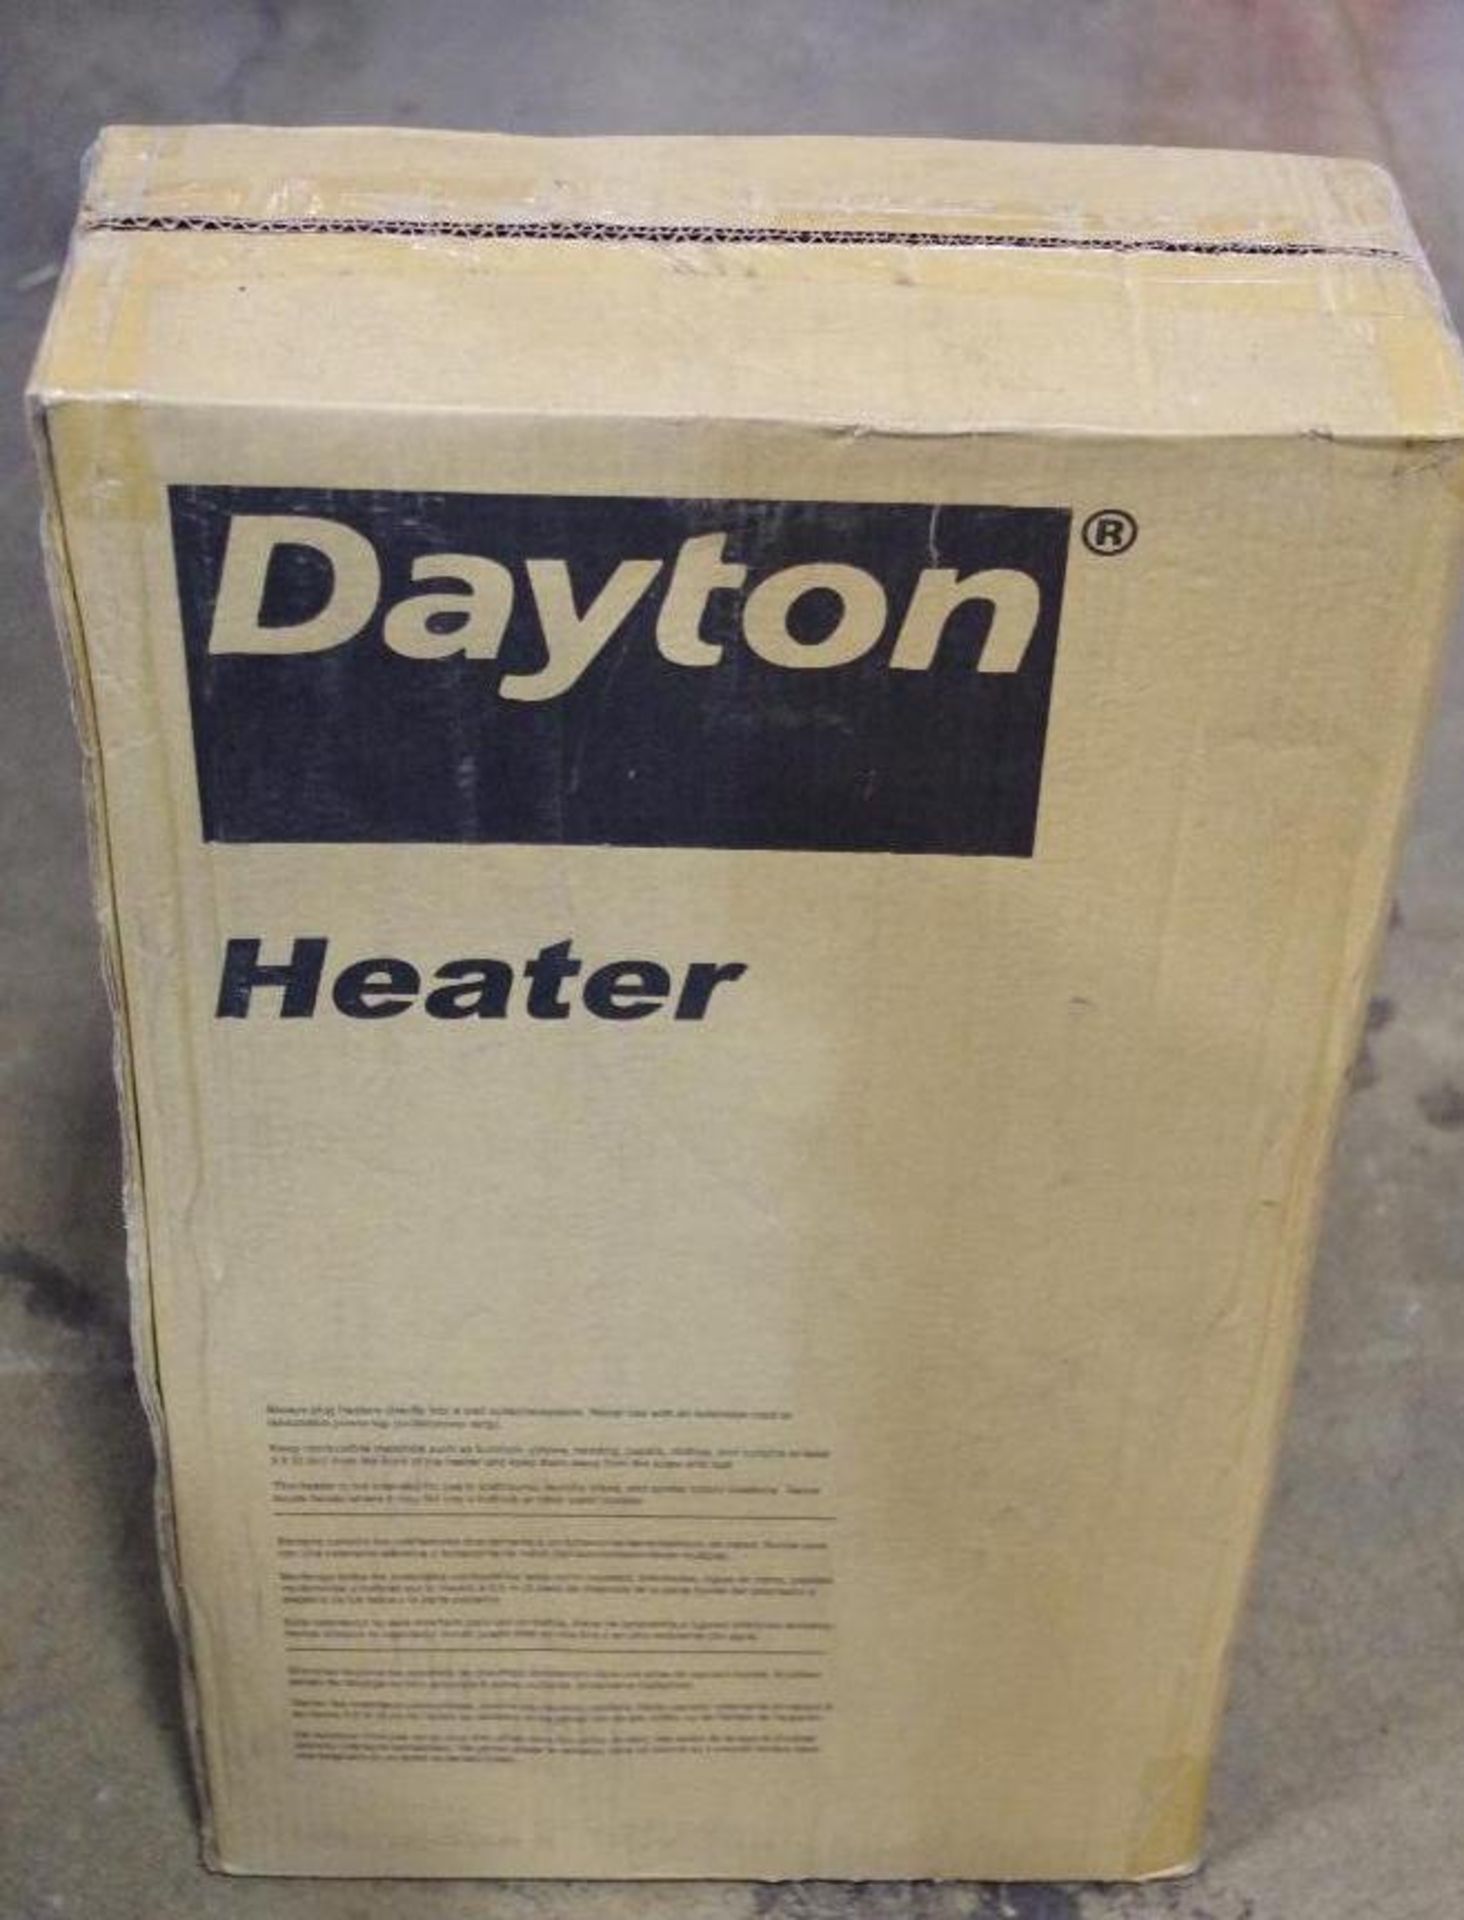 DAYTON Radiant Portable Electric Heater, Gray, 120VAC (Appears NEW) - Image 2 of 3